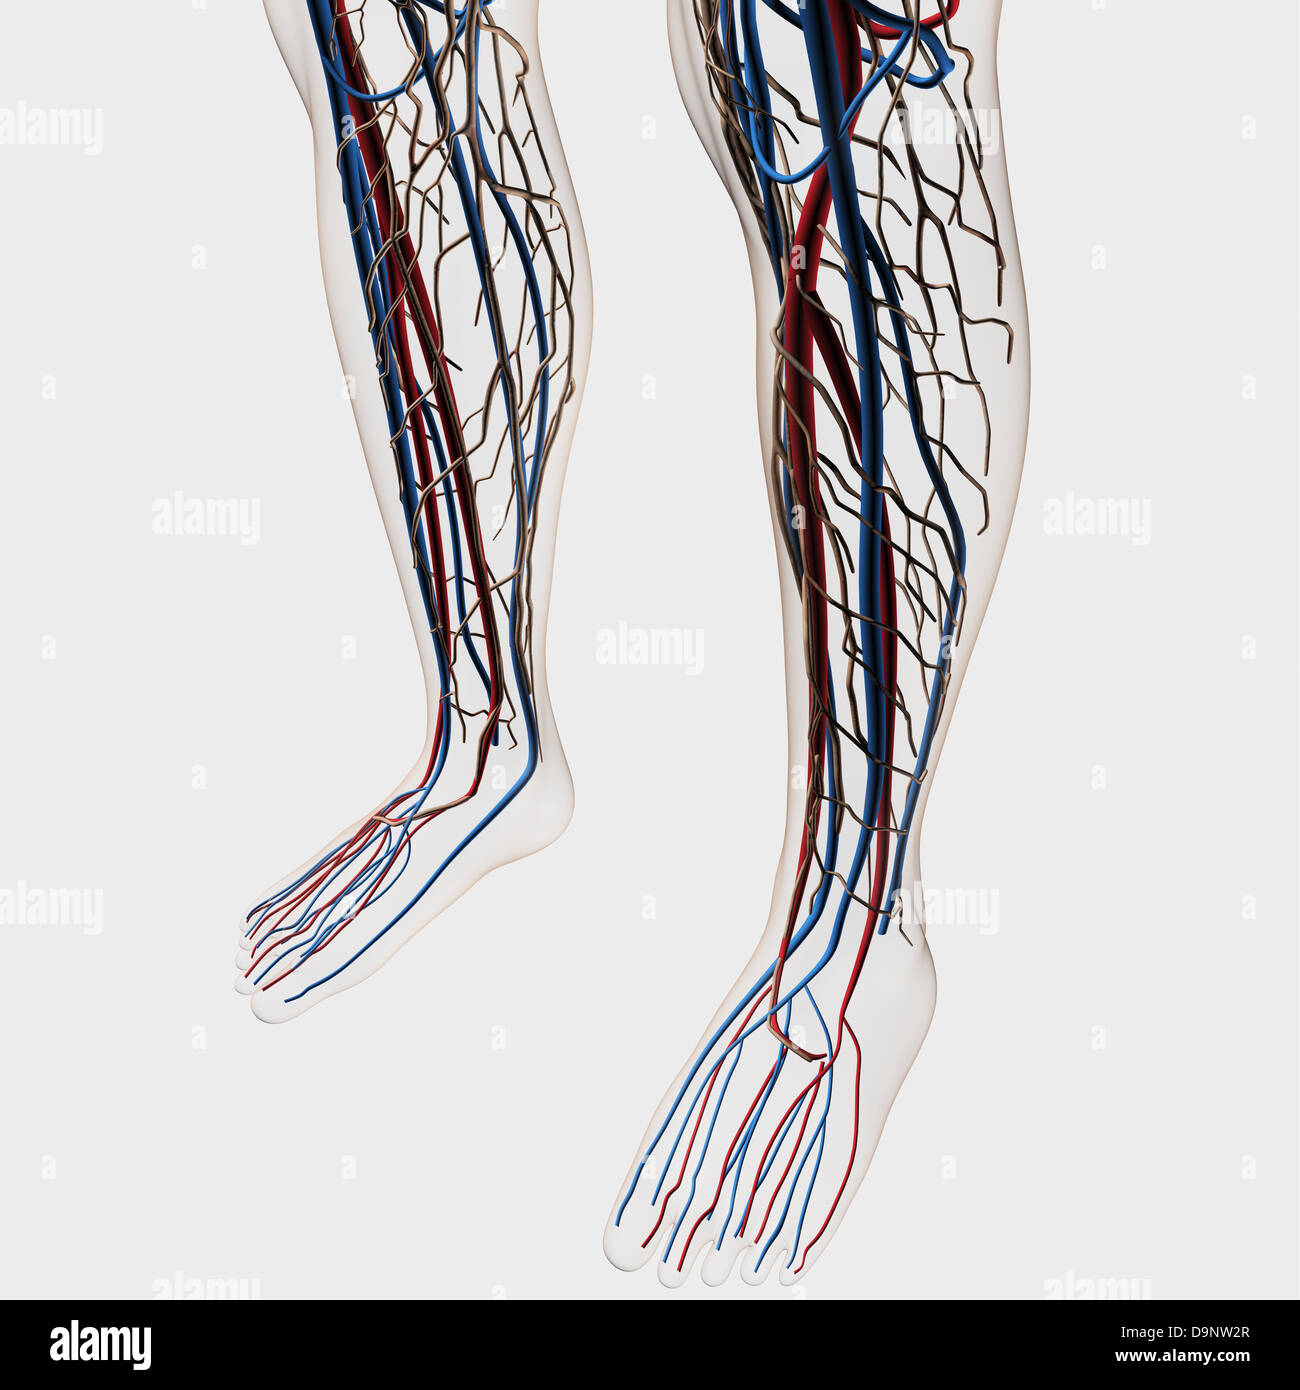 Medical illustration of arteries, veins and lymphatic system in human legs and feet. Stock Photo